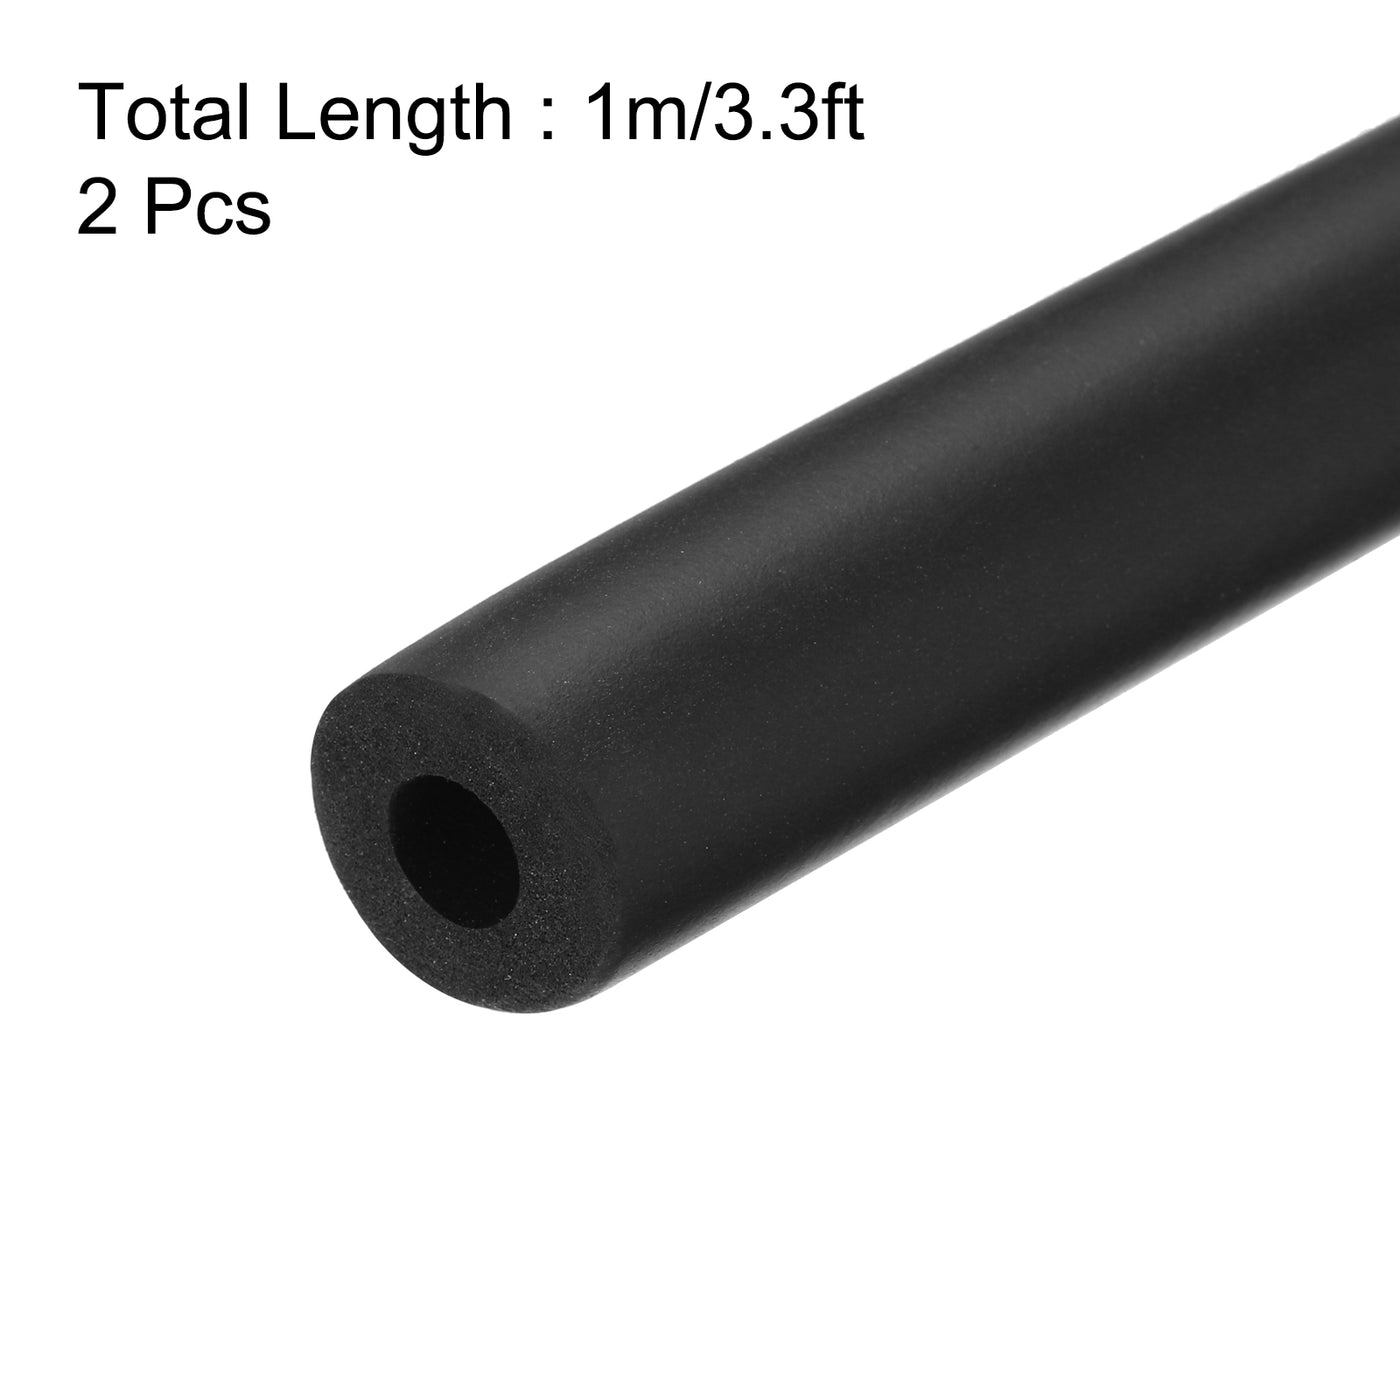 uxcell Uxcell 2pcs 3.3ft Pipe Insulation Tube 5/16 Inch(8mm) ID 18mm OD Foam Tubing for Handle Grip Support, Black